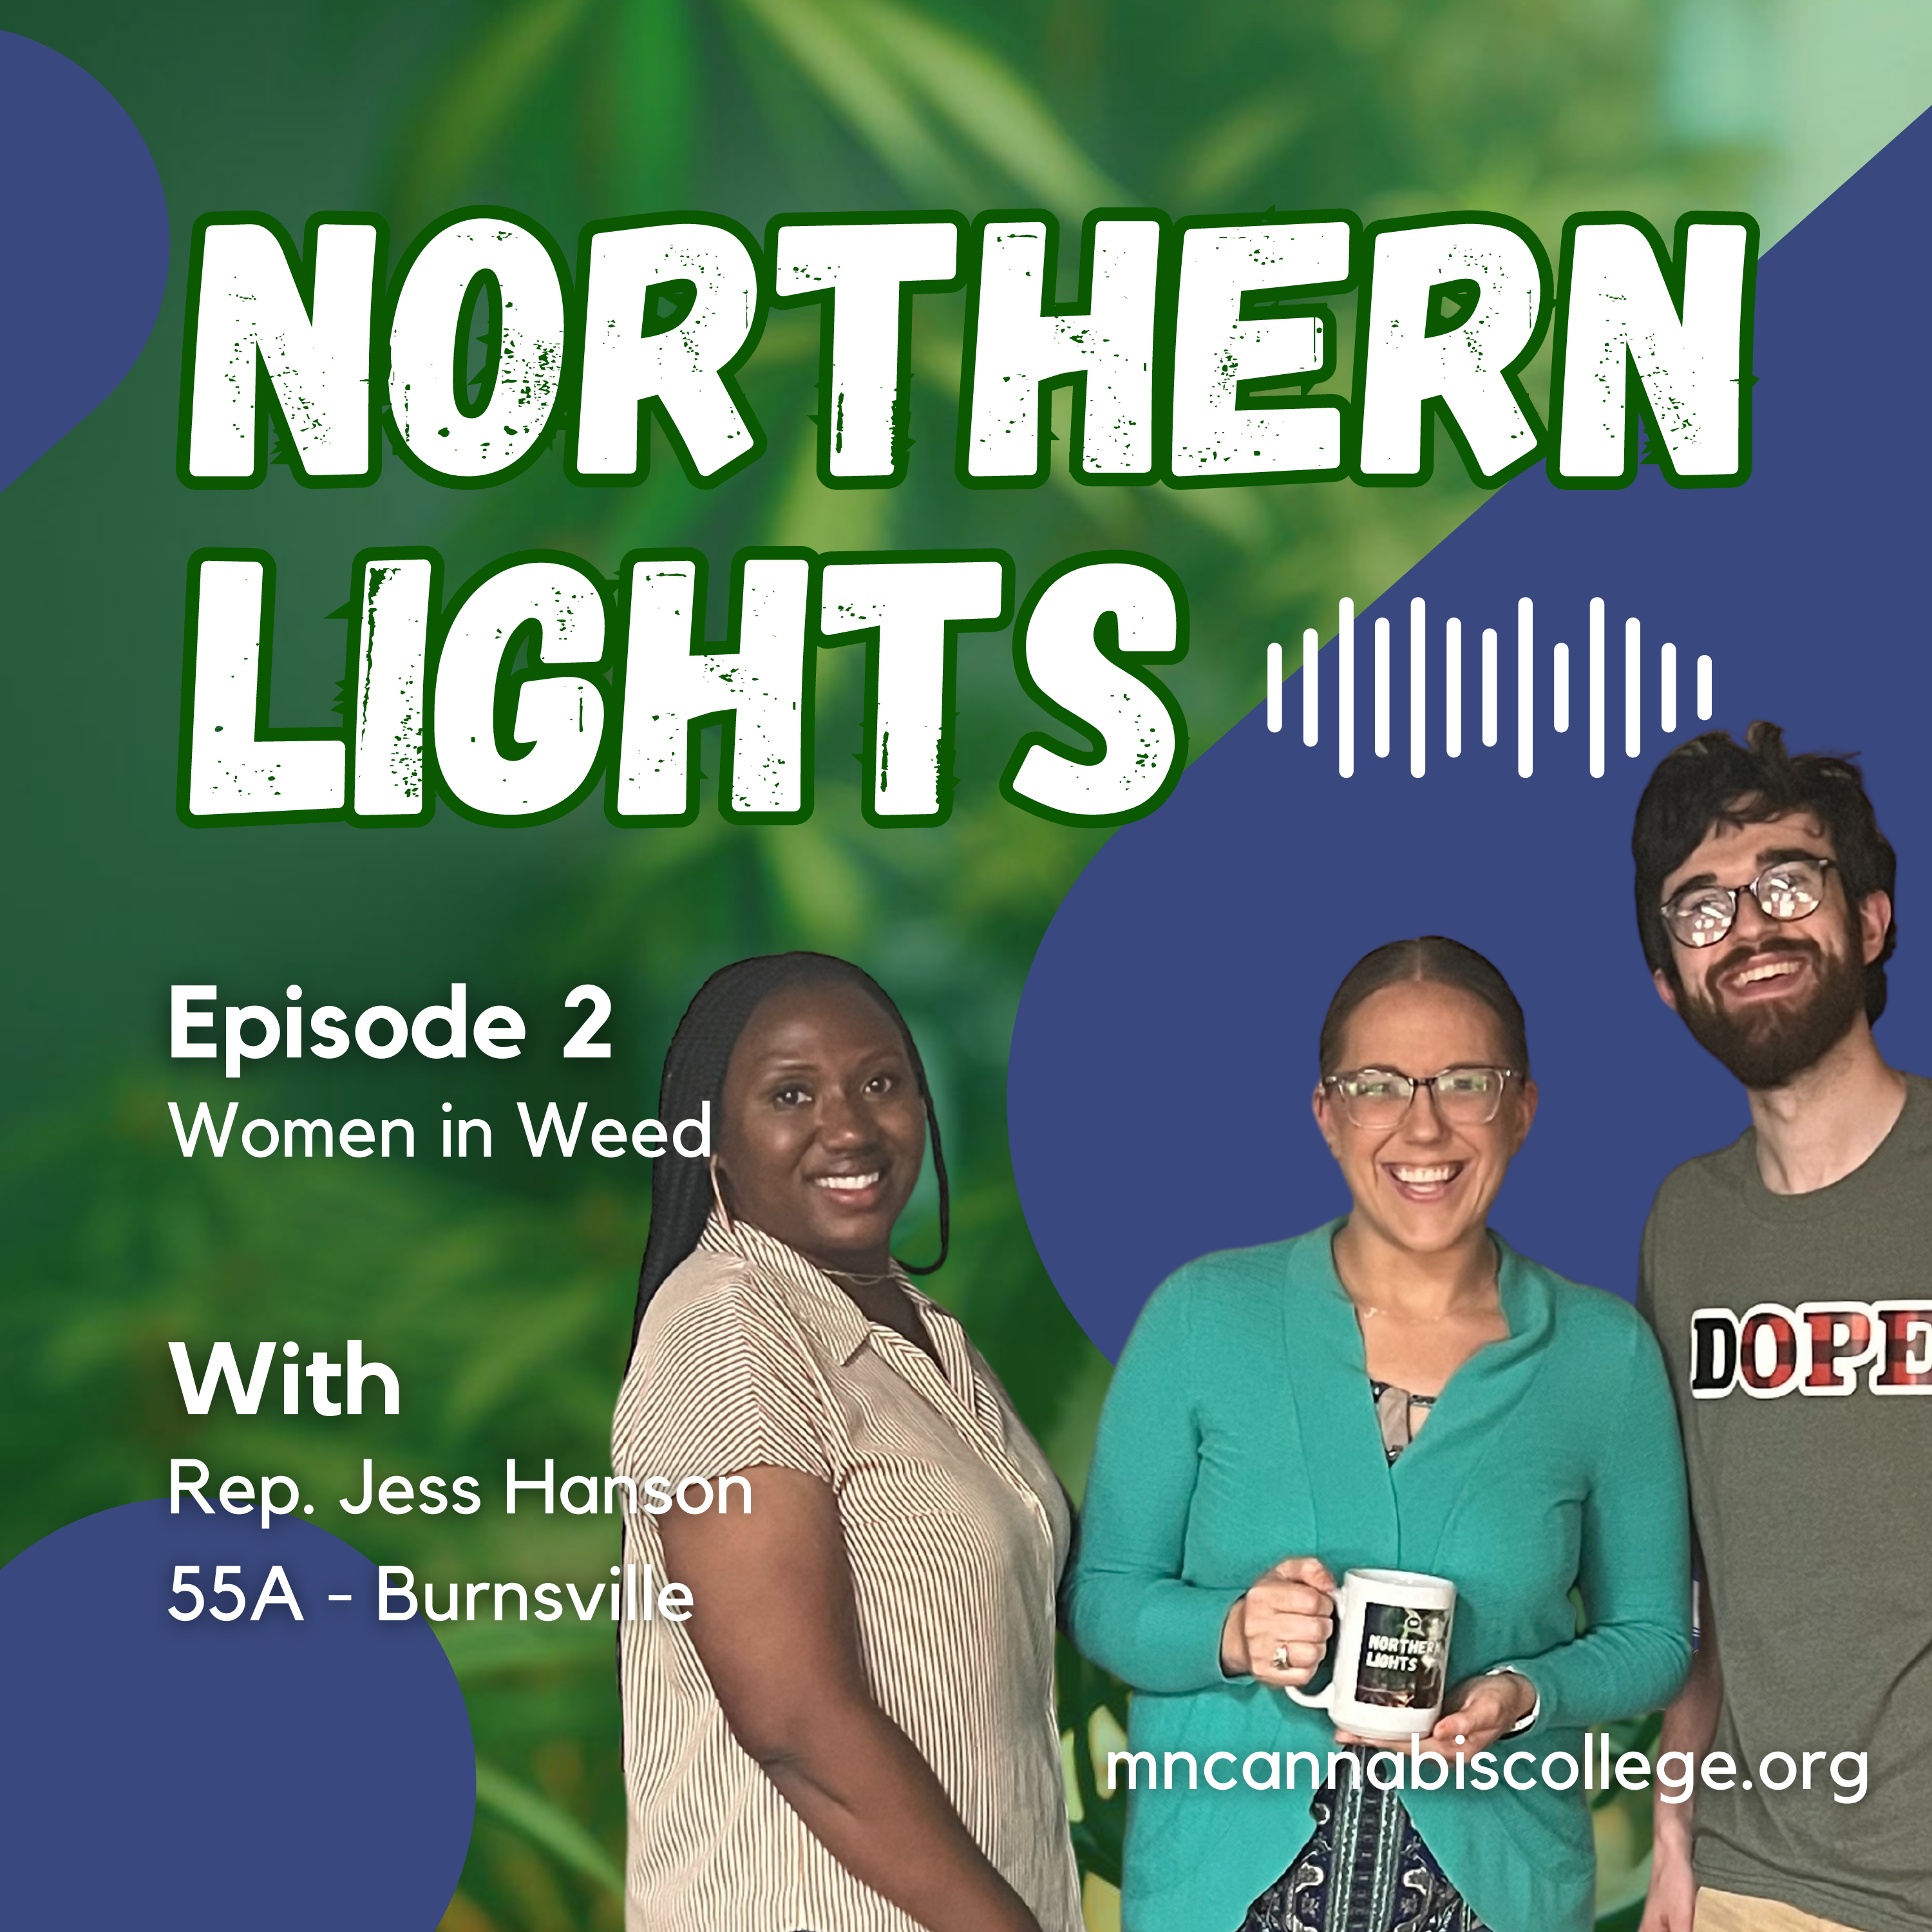 Northern Lights | Episode 2 – Women in Weed (with Rep. Jess Hanson)